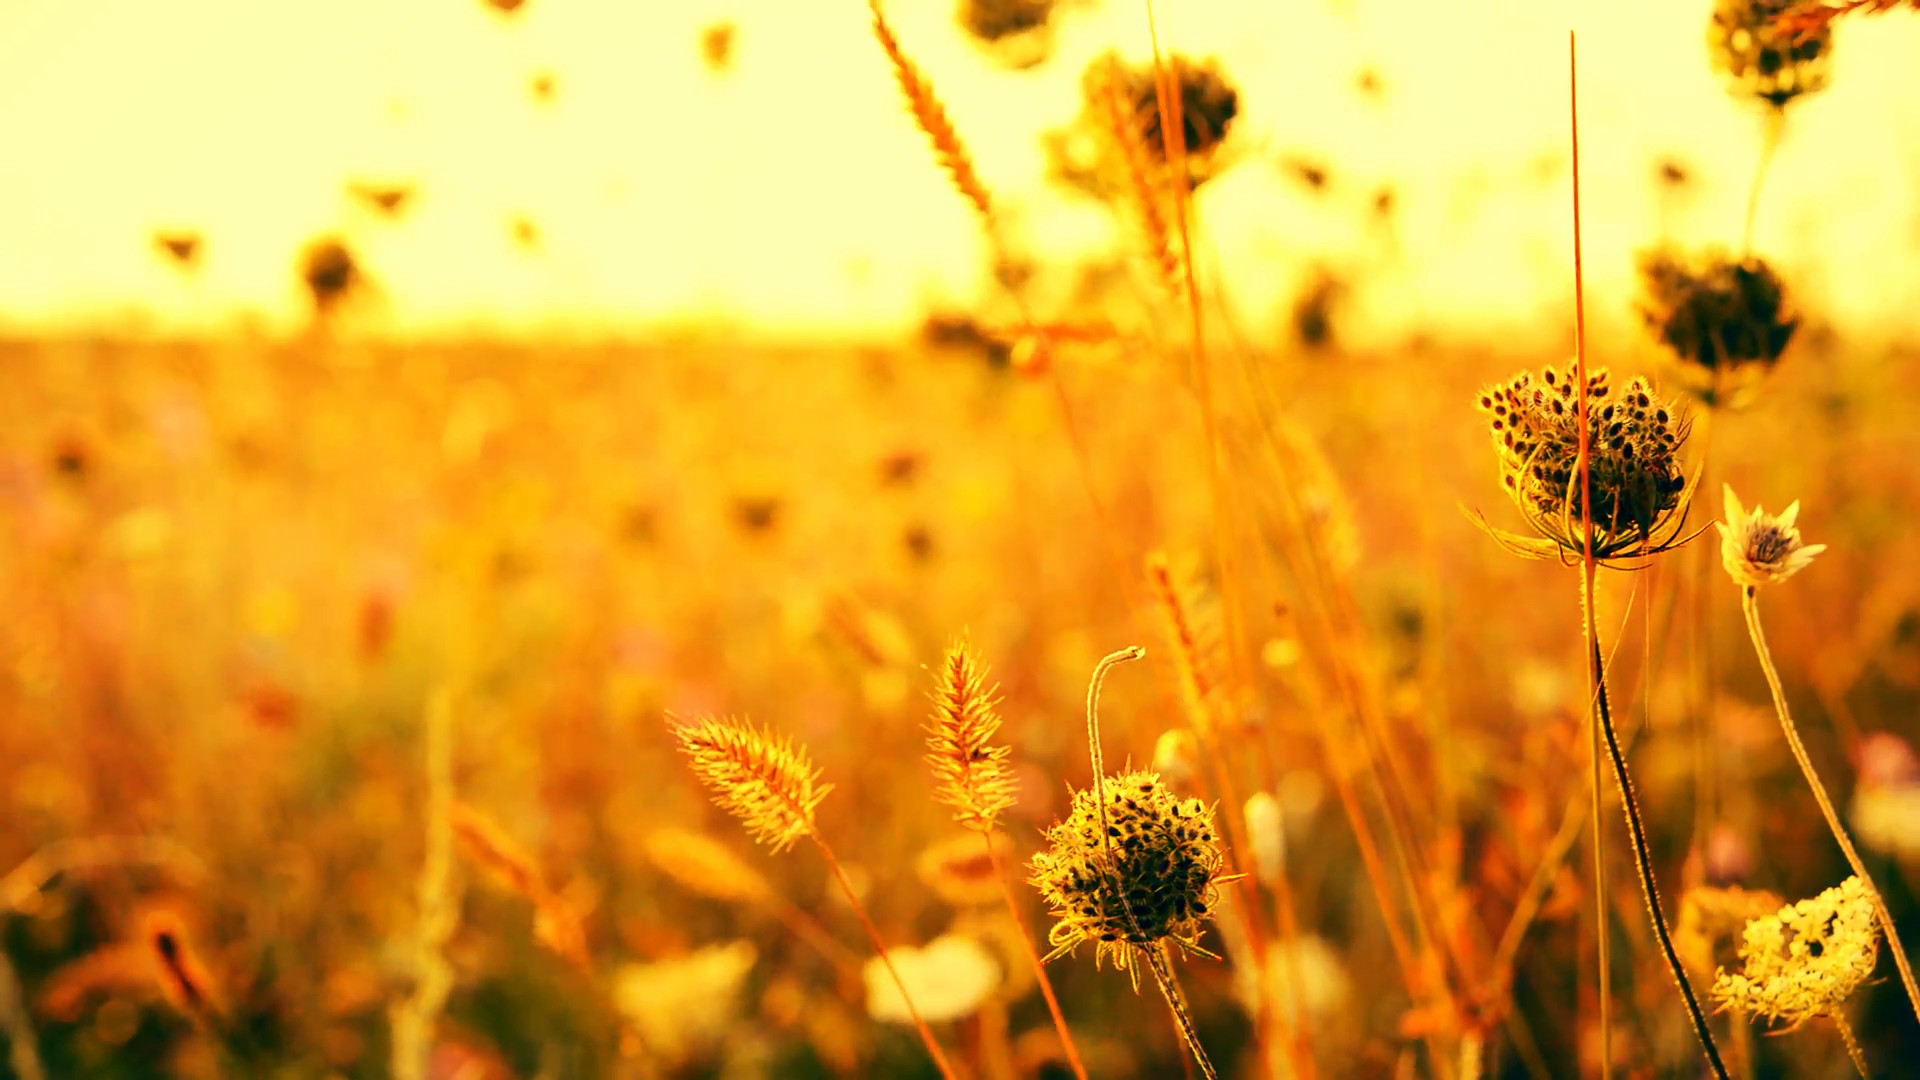 Beautiful Flowers In Field On Sunrise Background Sunny Outdoor Bright Morning Autumn Theme Background Closeup Full Hd Video Stock Video Footage 1920x1080